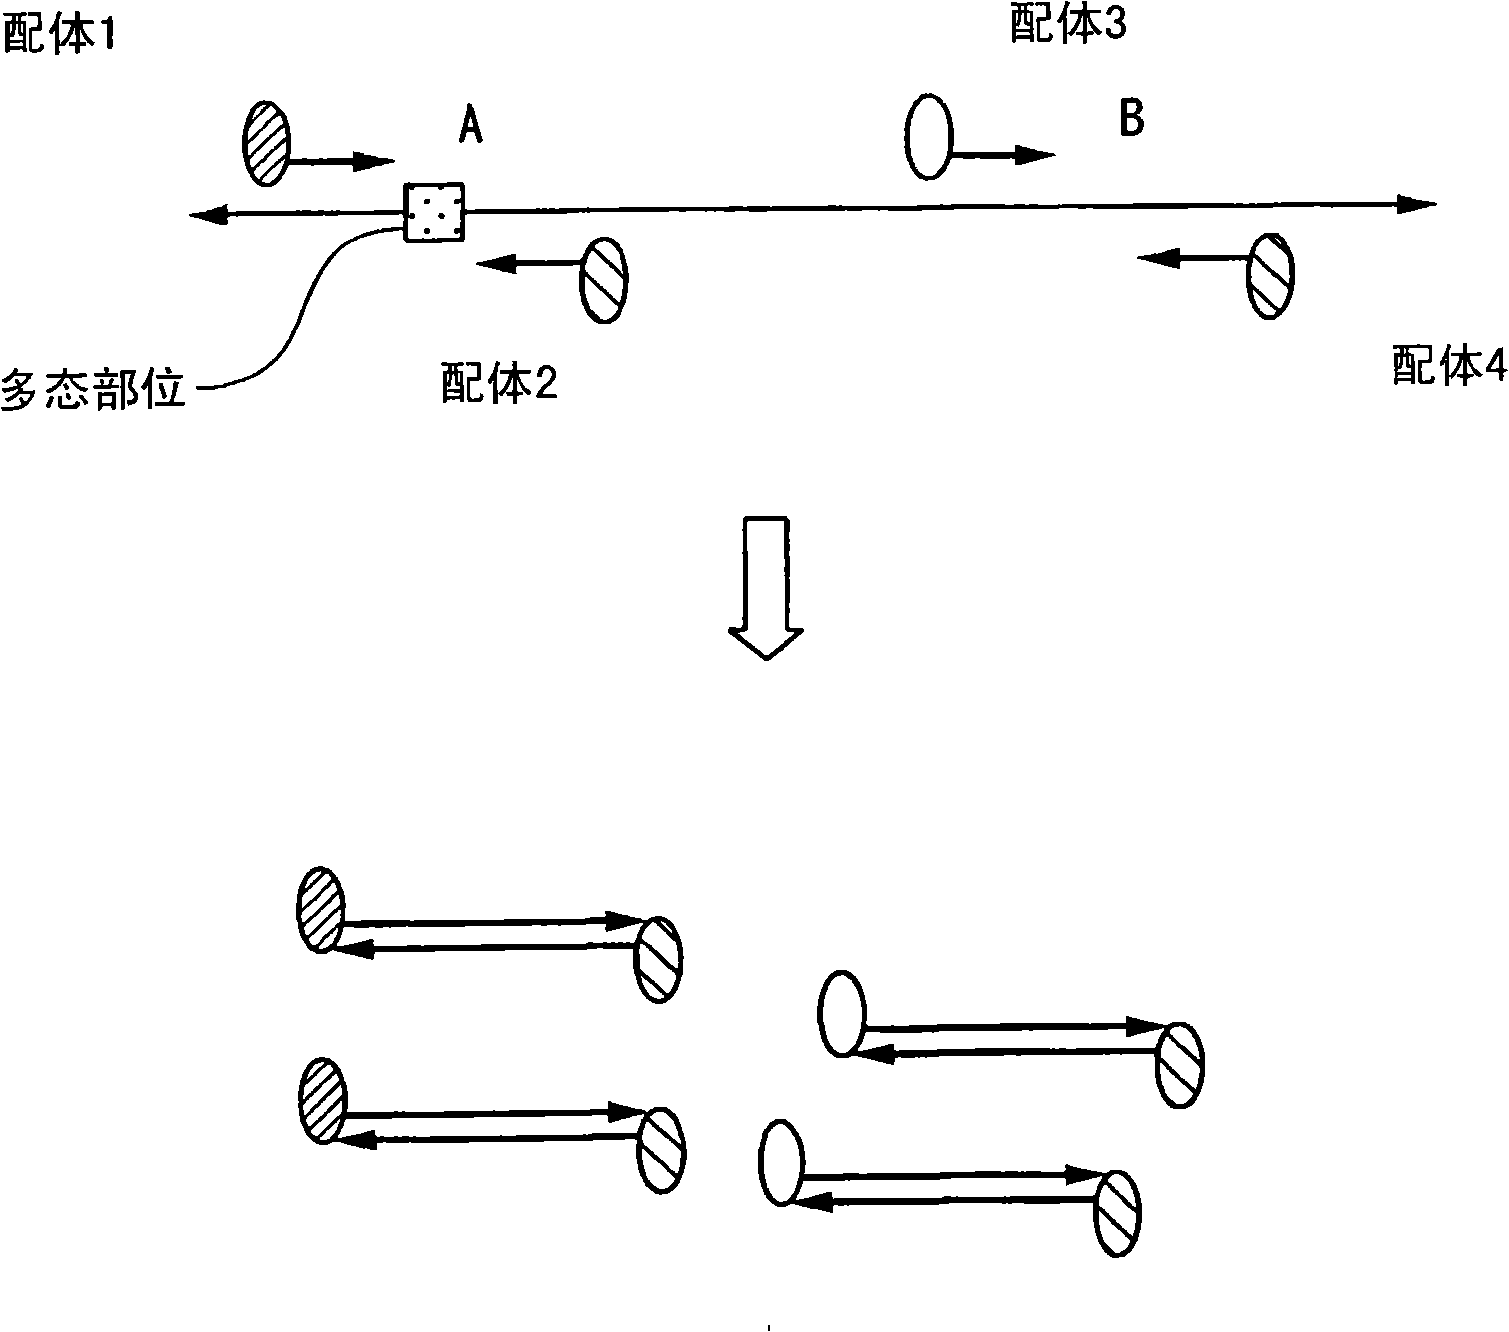 Method of analyzing change in primary structure of nucleic acid